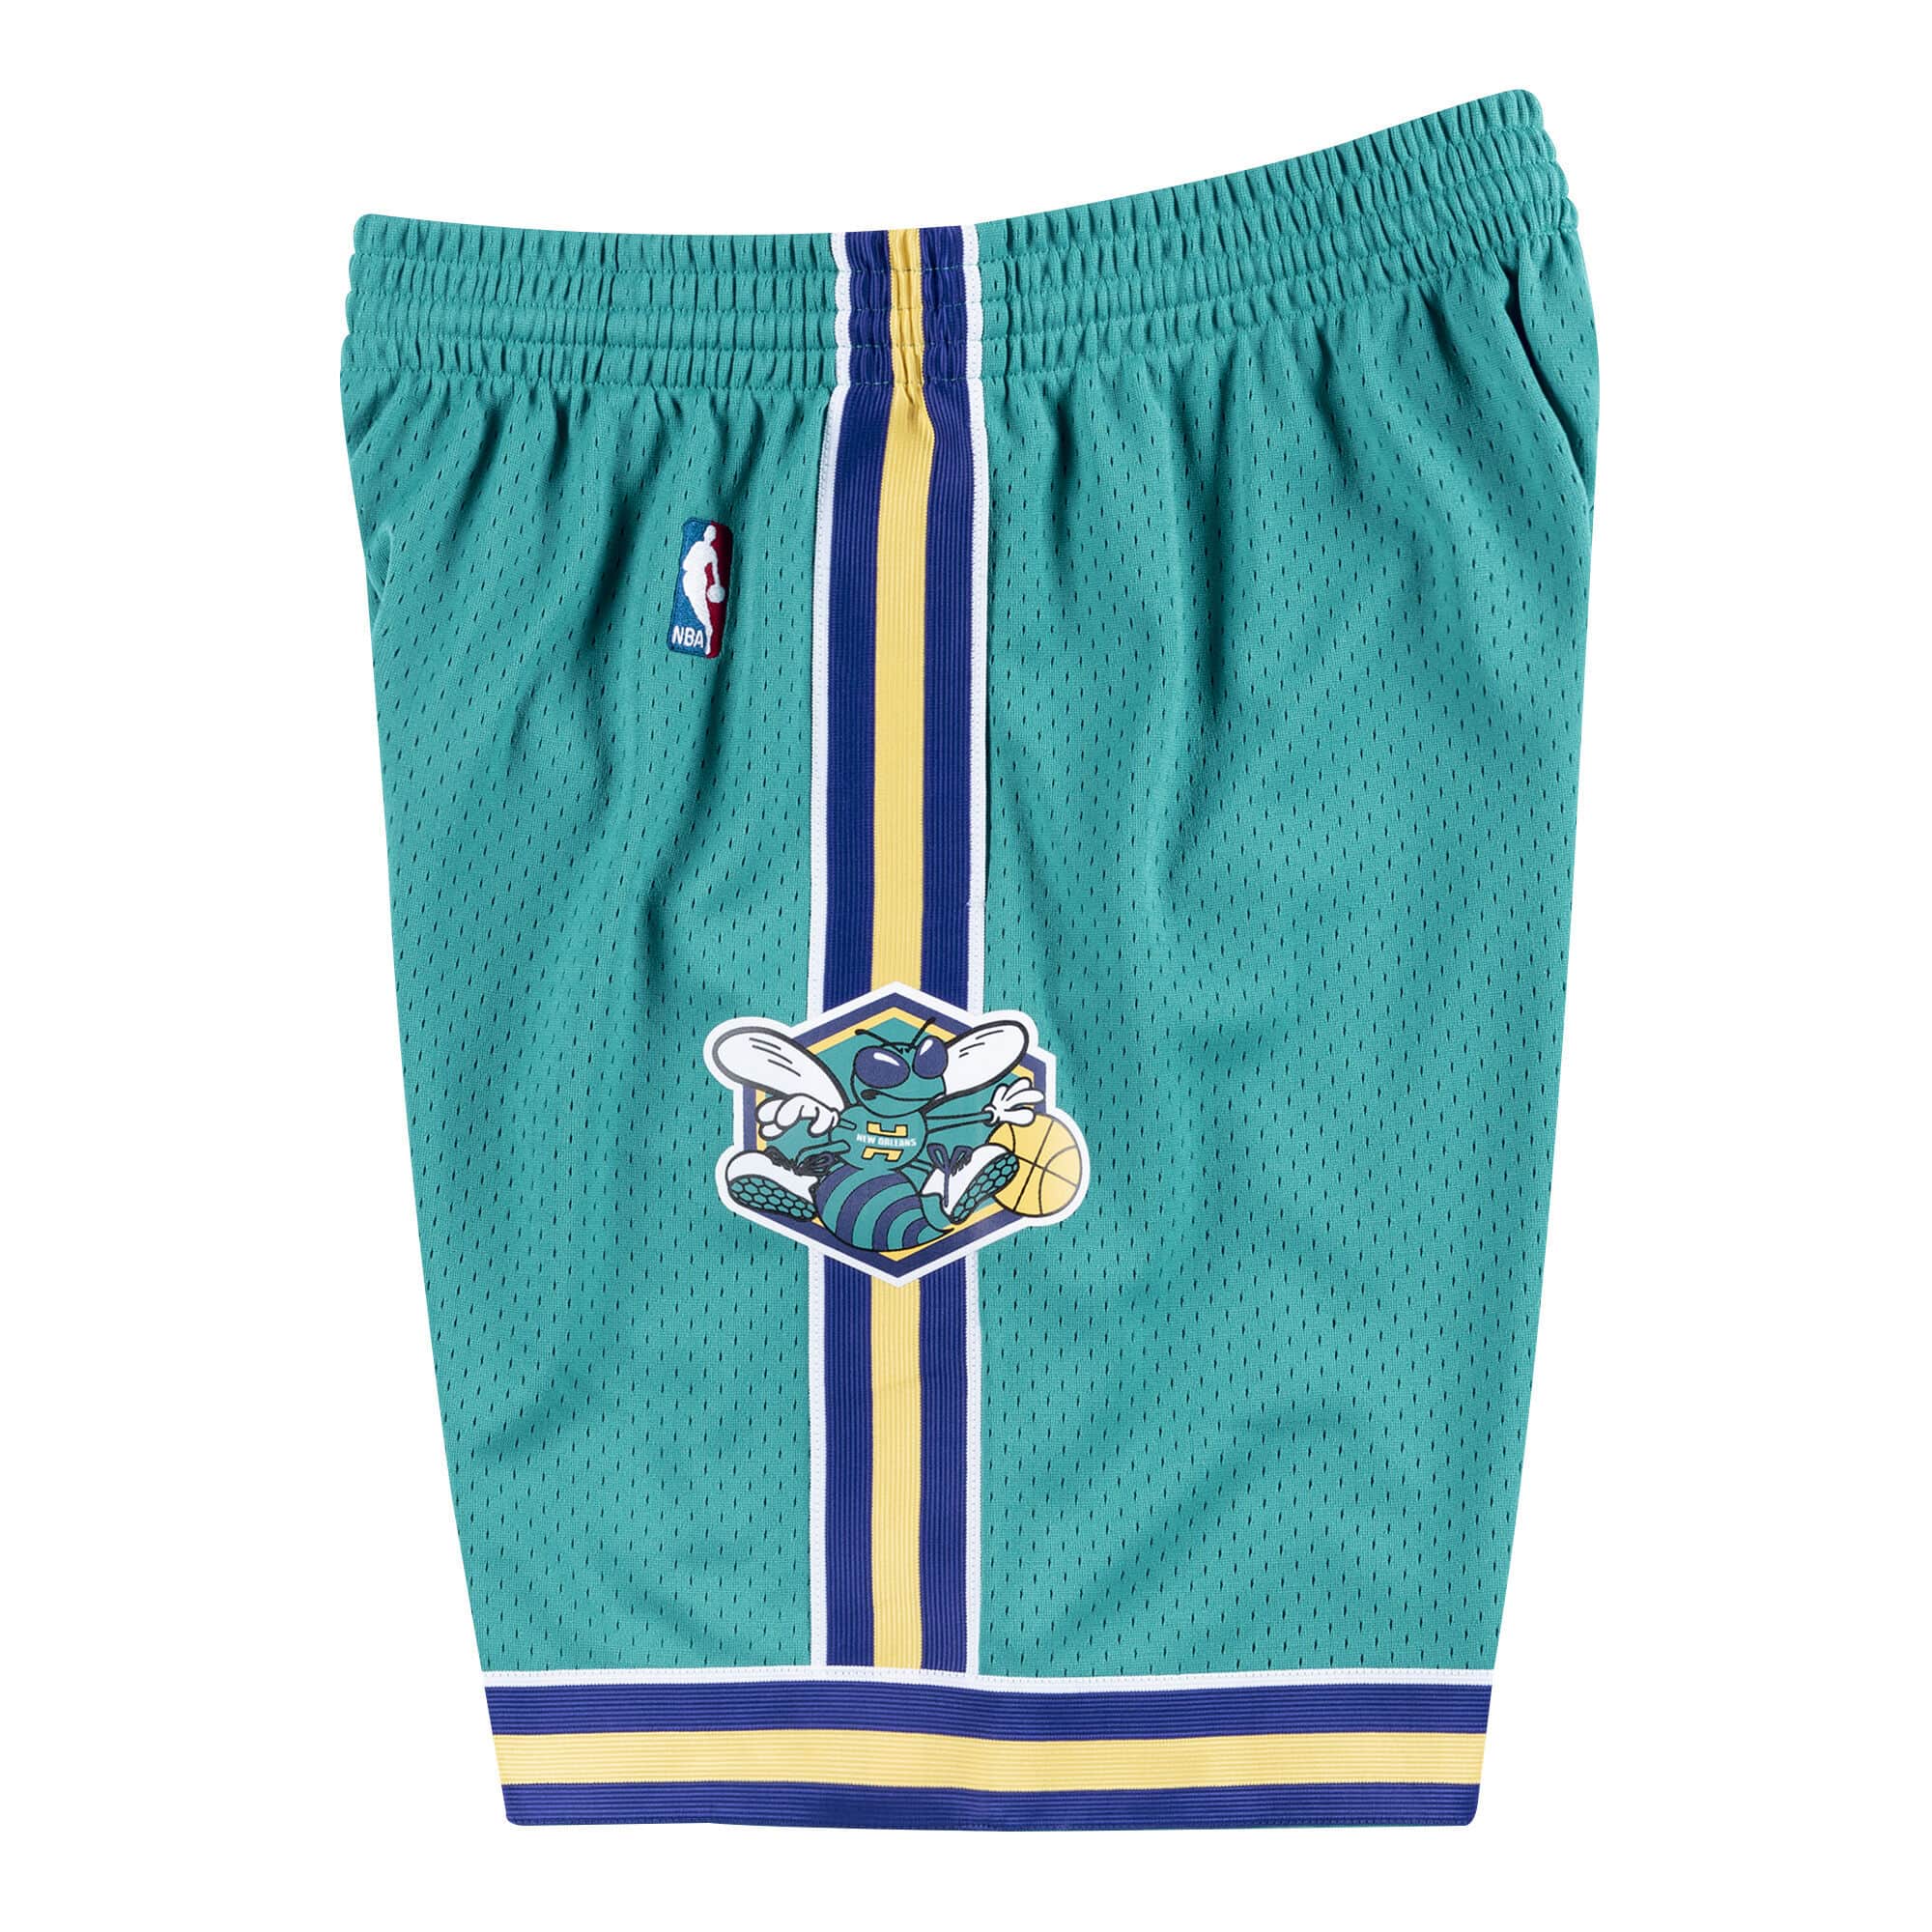 Teal New Orleans Hornets 2005-06 Mitchell & Ness Hardeood Classic Men's Swingman Shorts